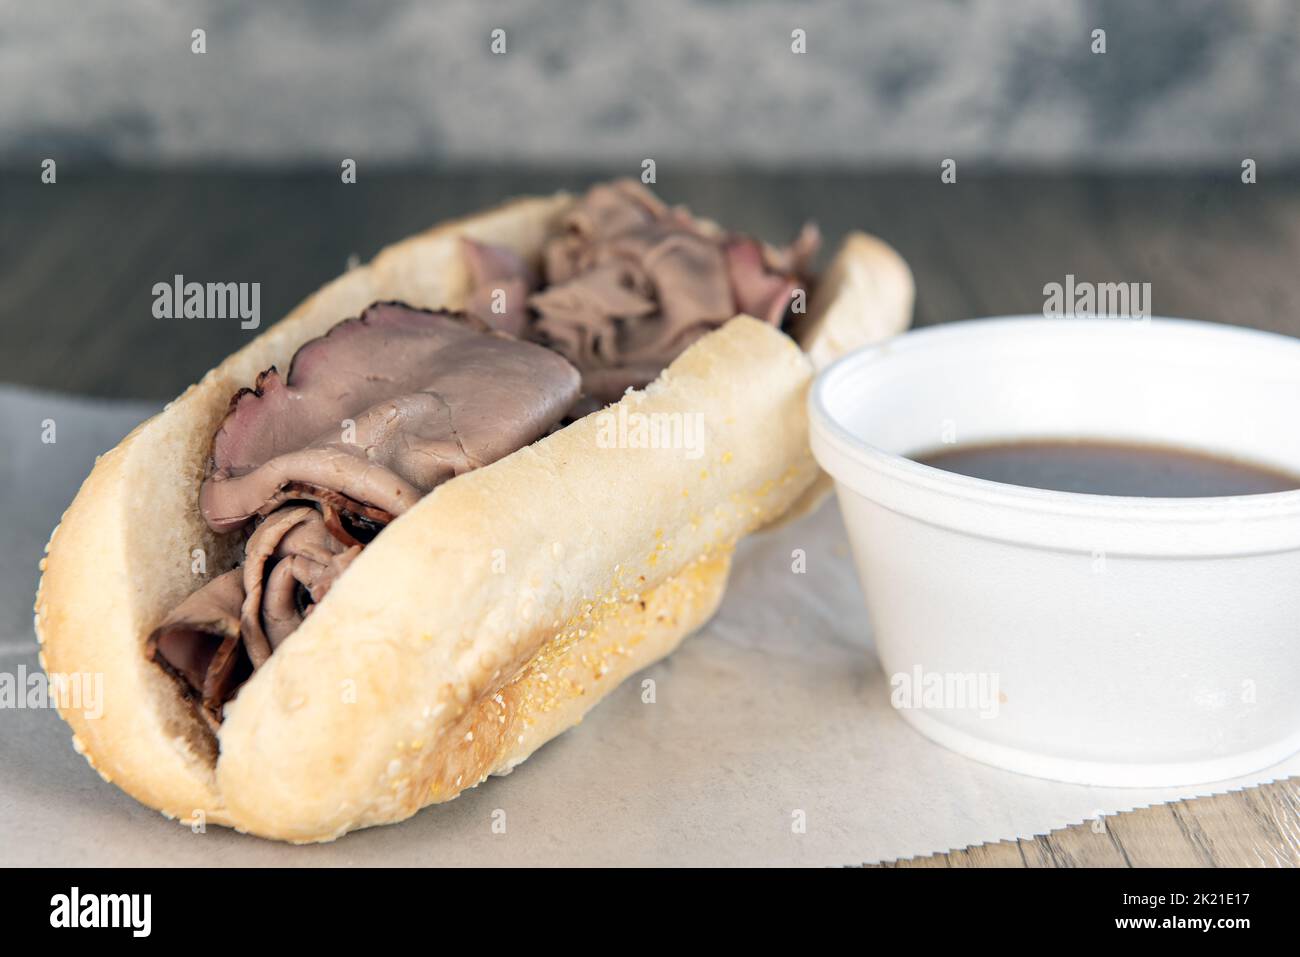 Lunch is served with a loaded roast beef french dip sandwich with auju sauce for dipping. Stock Photo